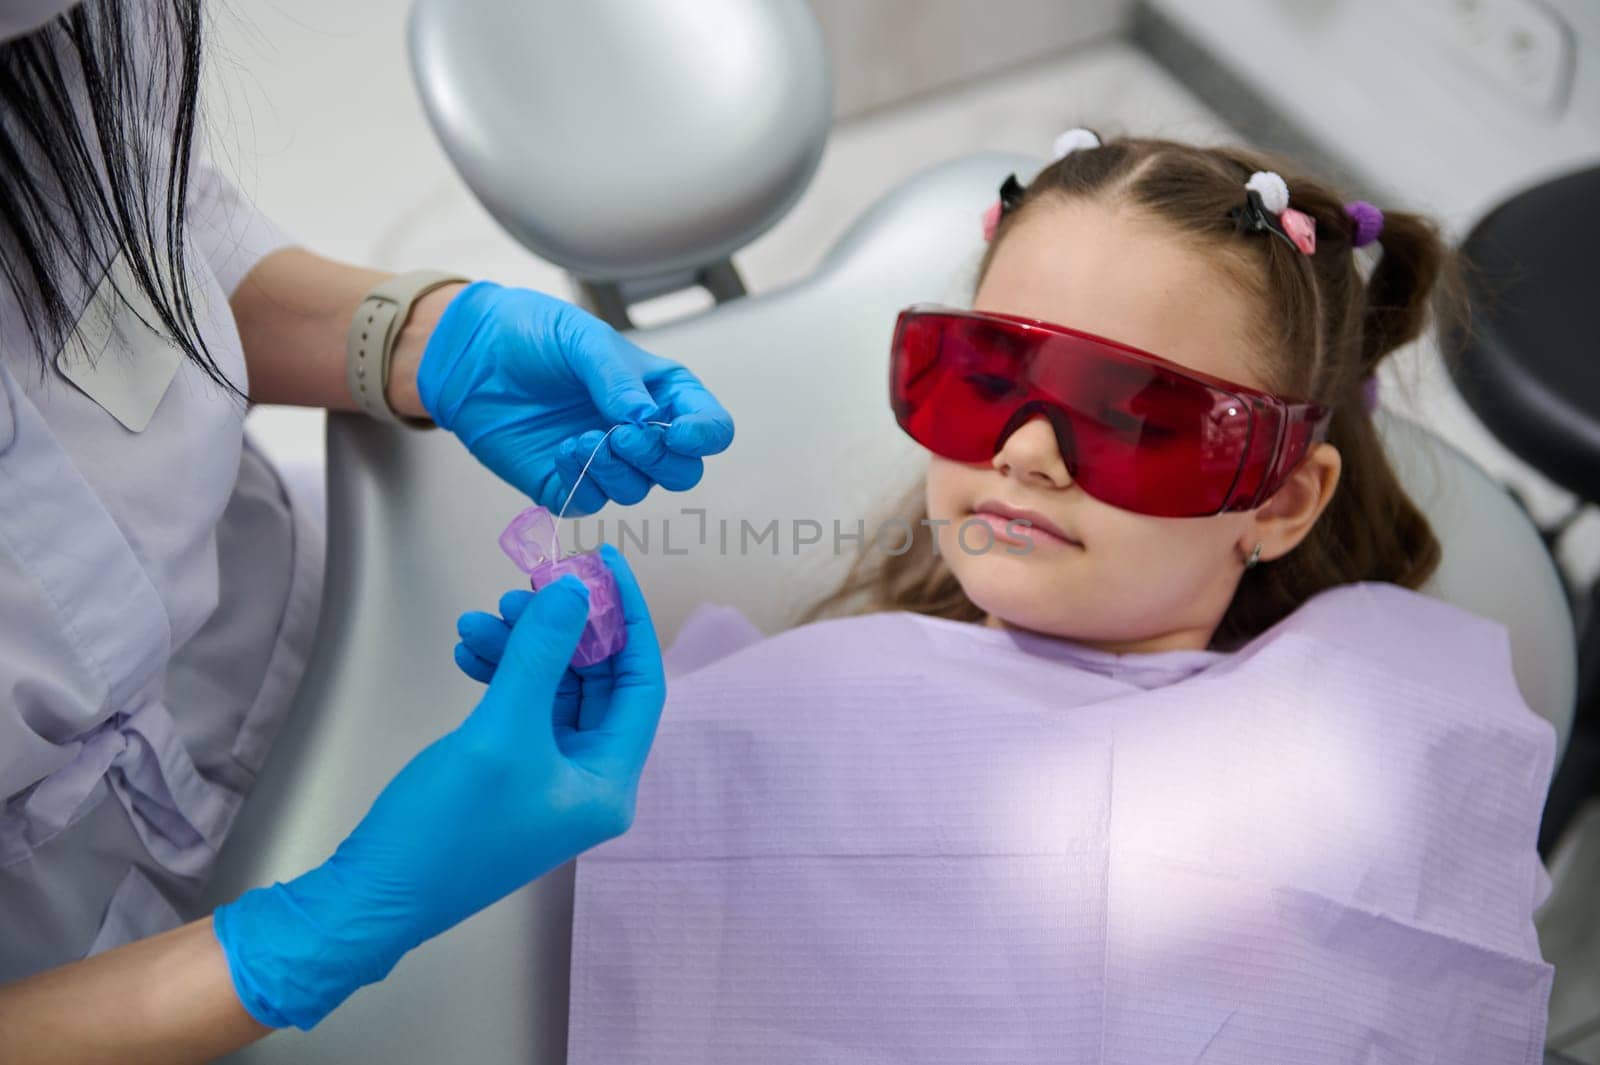 Cute child girl listens to a dental hygienist explaining how to clean teeth using a dental floss after teeth brushing, during dentist's appointment in dentistry clinic. Oral care and hygiene concept